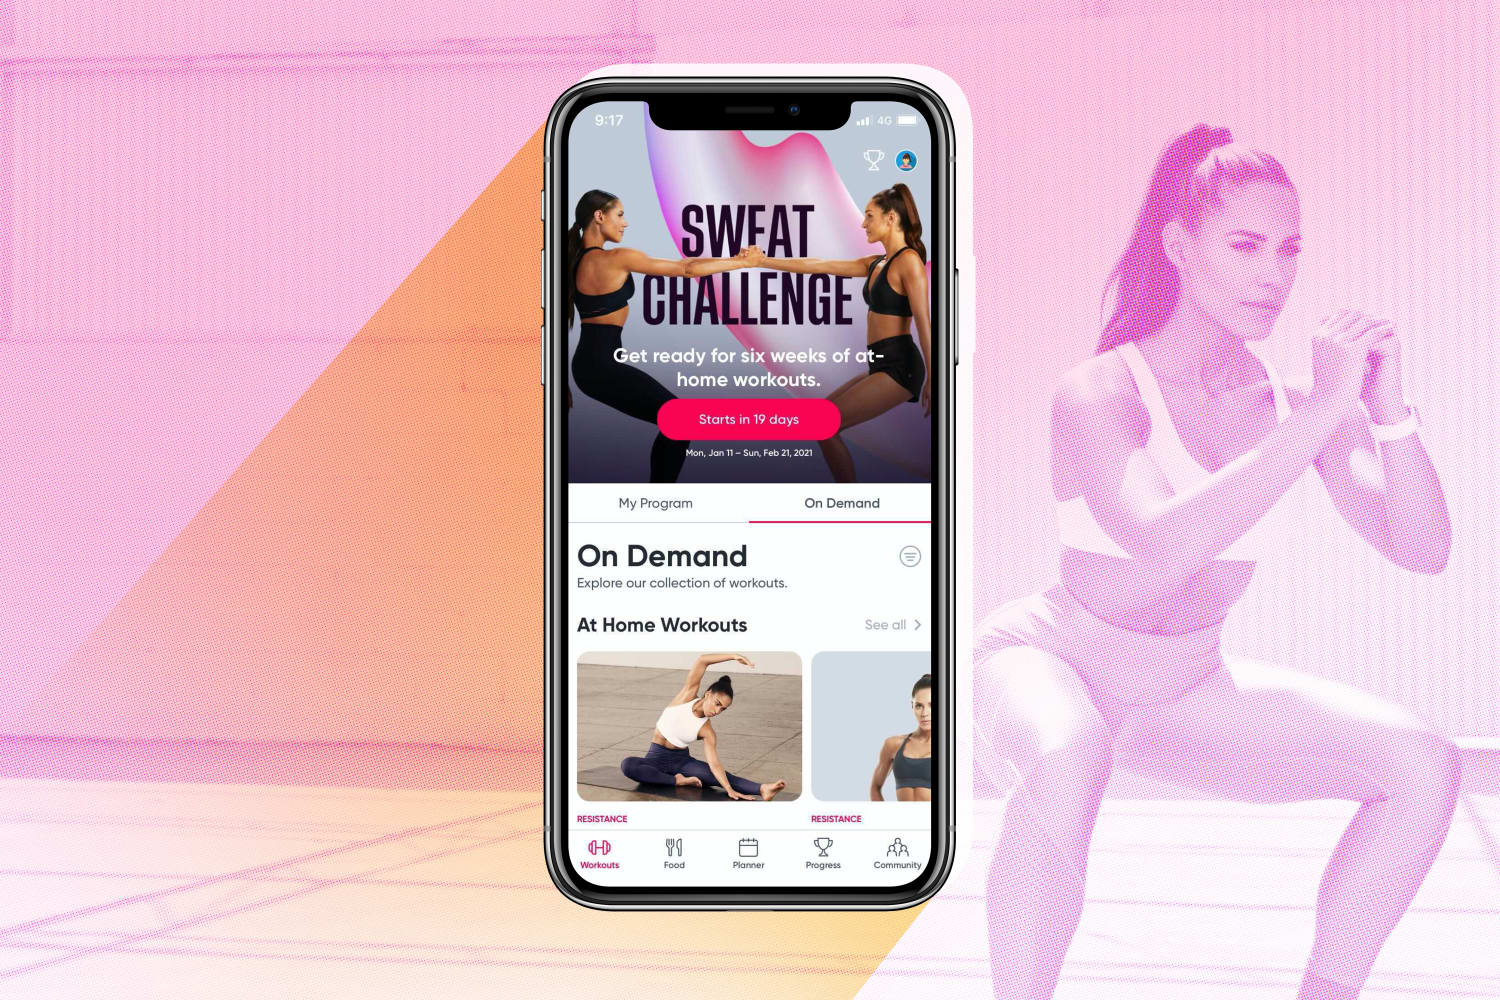 This $20 App Is Proof You Can Get a Seriously Effective Workout Done in Under 30 Minutes